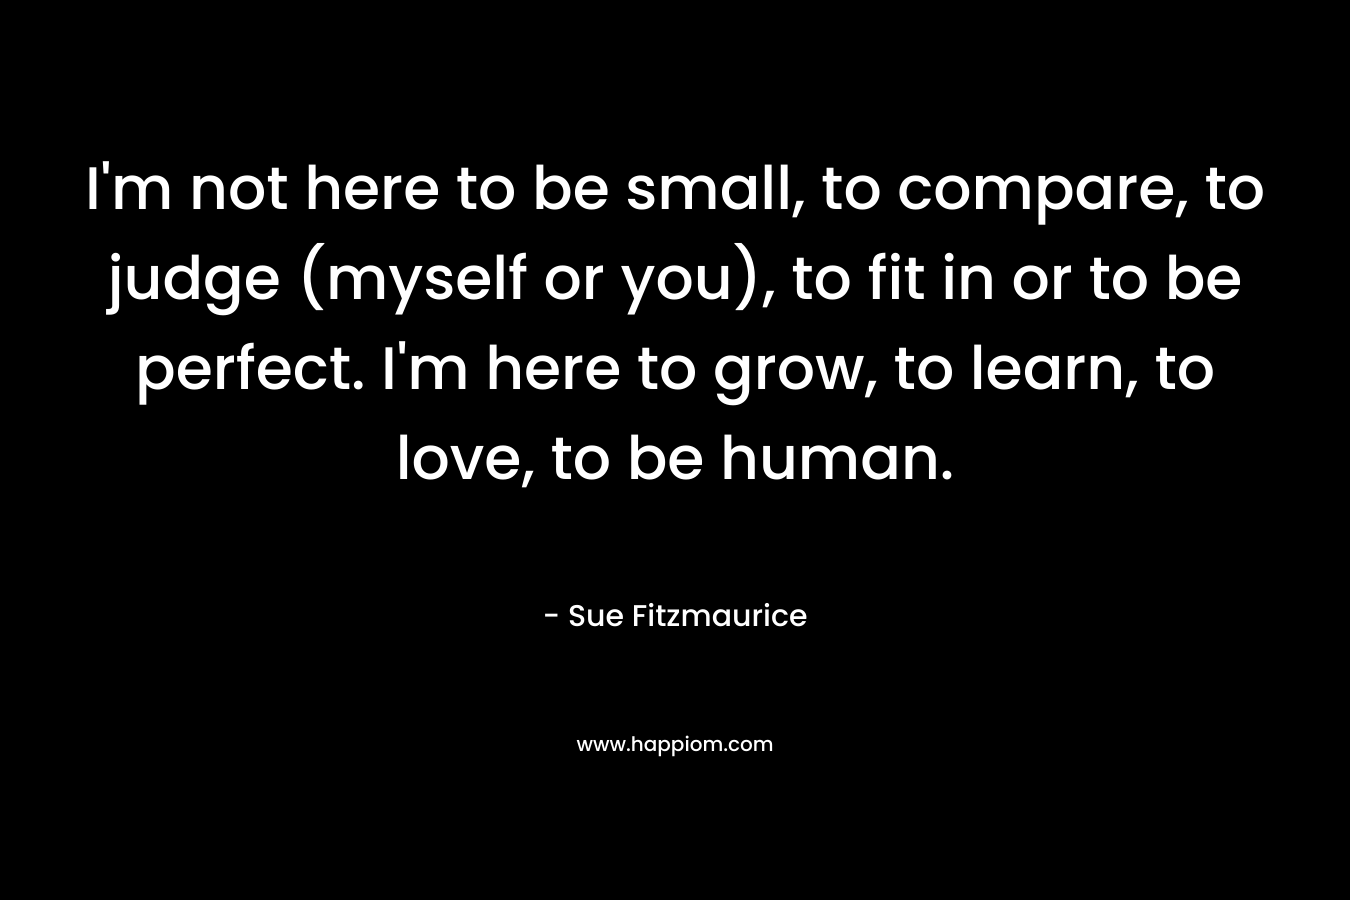 I’m not here to be small, to compare, to judge (myself or you), to fit in or to be perfect. I’m here to grow, to learn, to love, to be human. – Sue Fitzmaurice